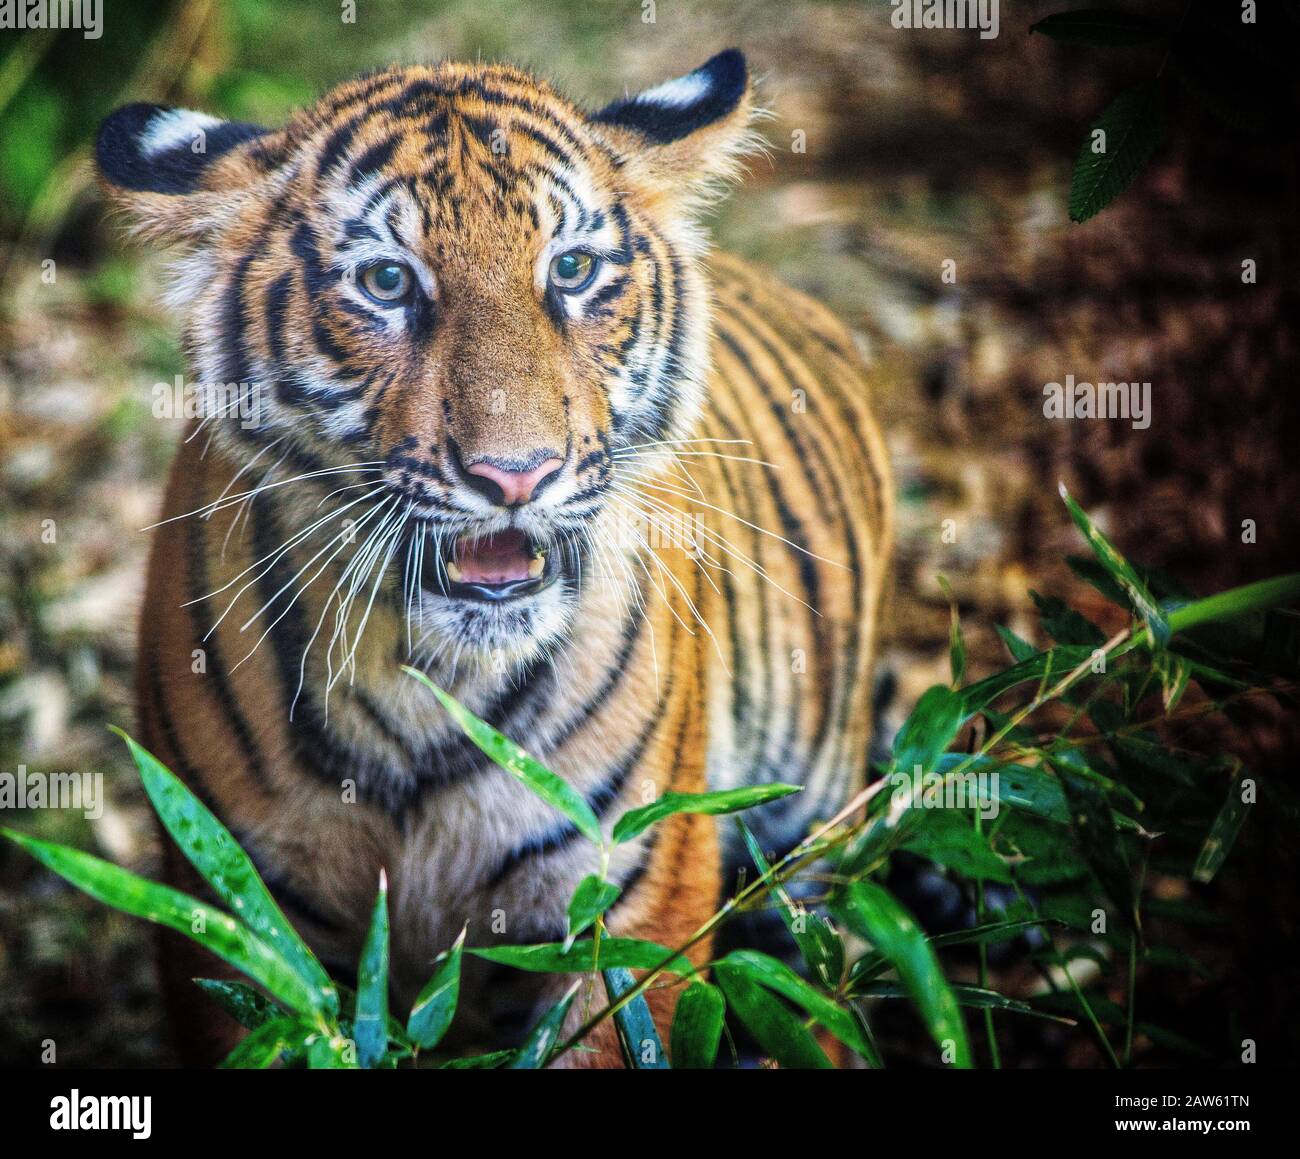 Front view of Bengal tiger with mouth partially open looking towards camera. Stock Photo